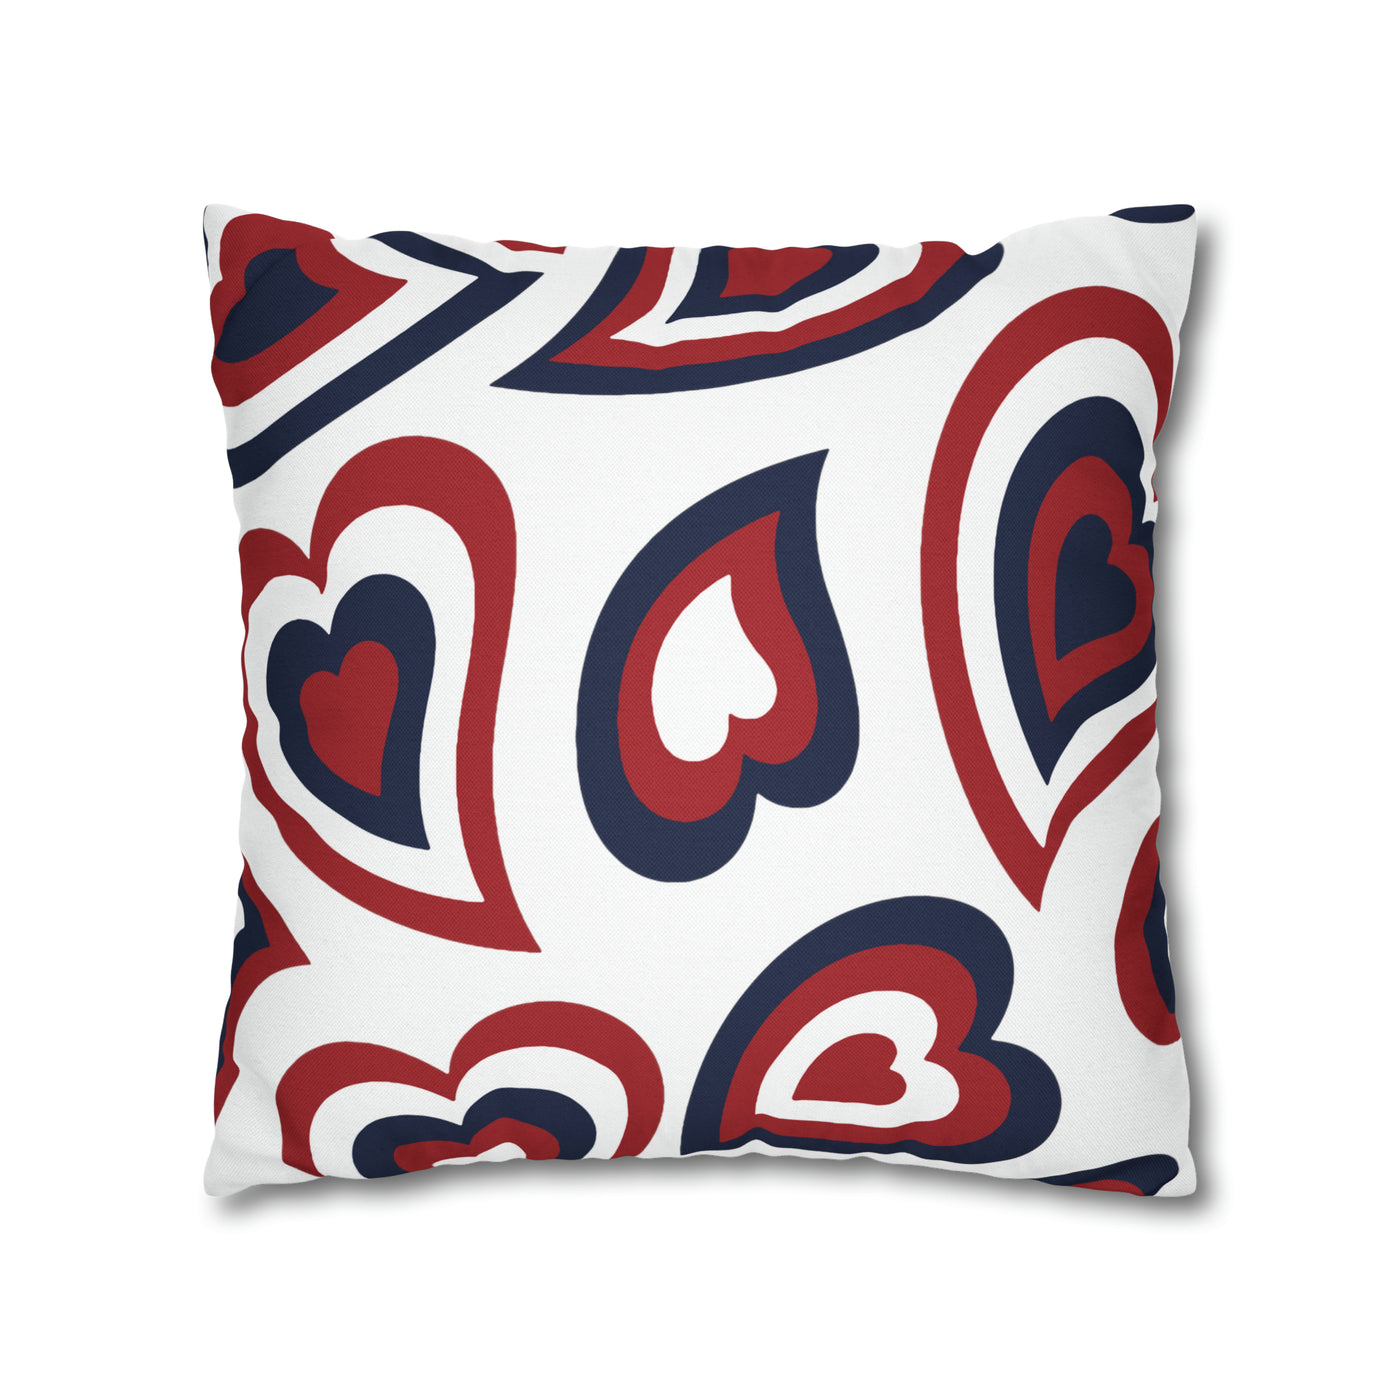 Retro Heart Pillow - Blue and Red, Heart Pillow, Hearts, Valentine's Day, Arizona, Bear Down, Bed Party Pillow, Camp, dorm decor, ZONA